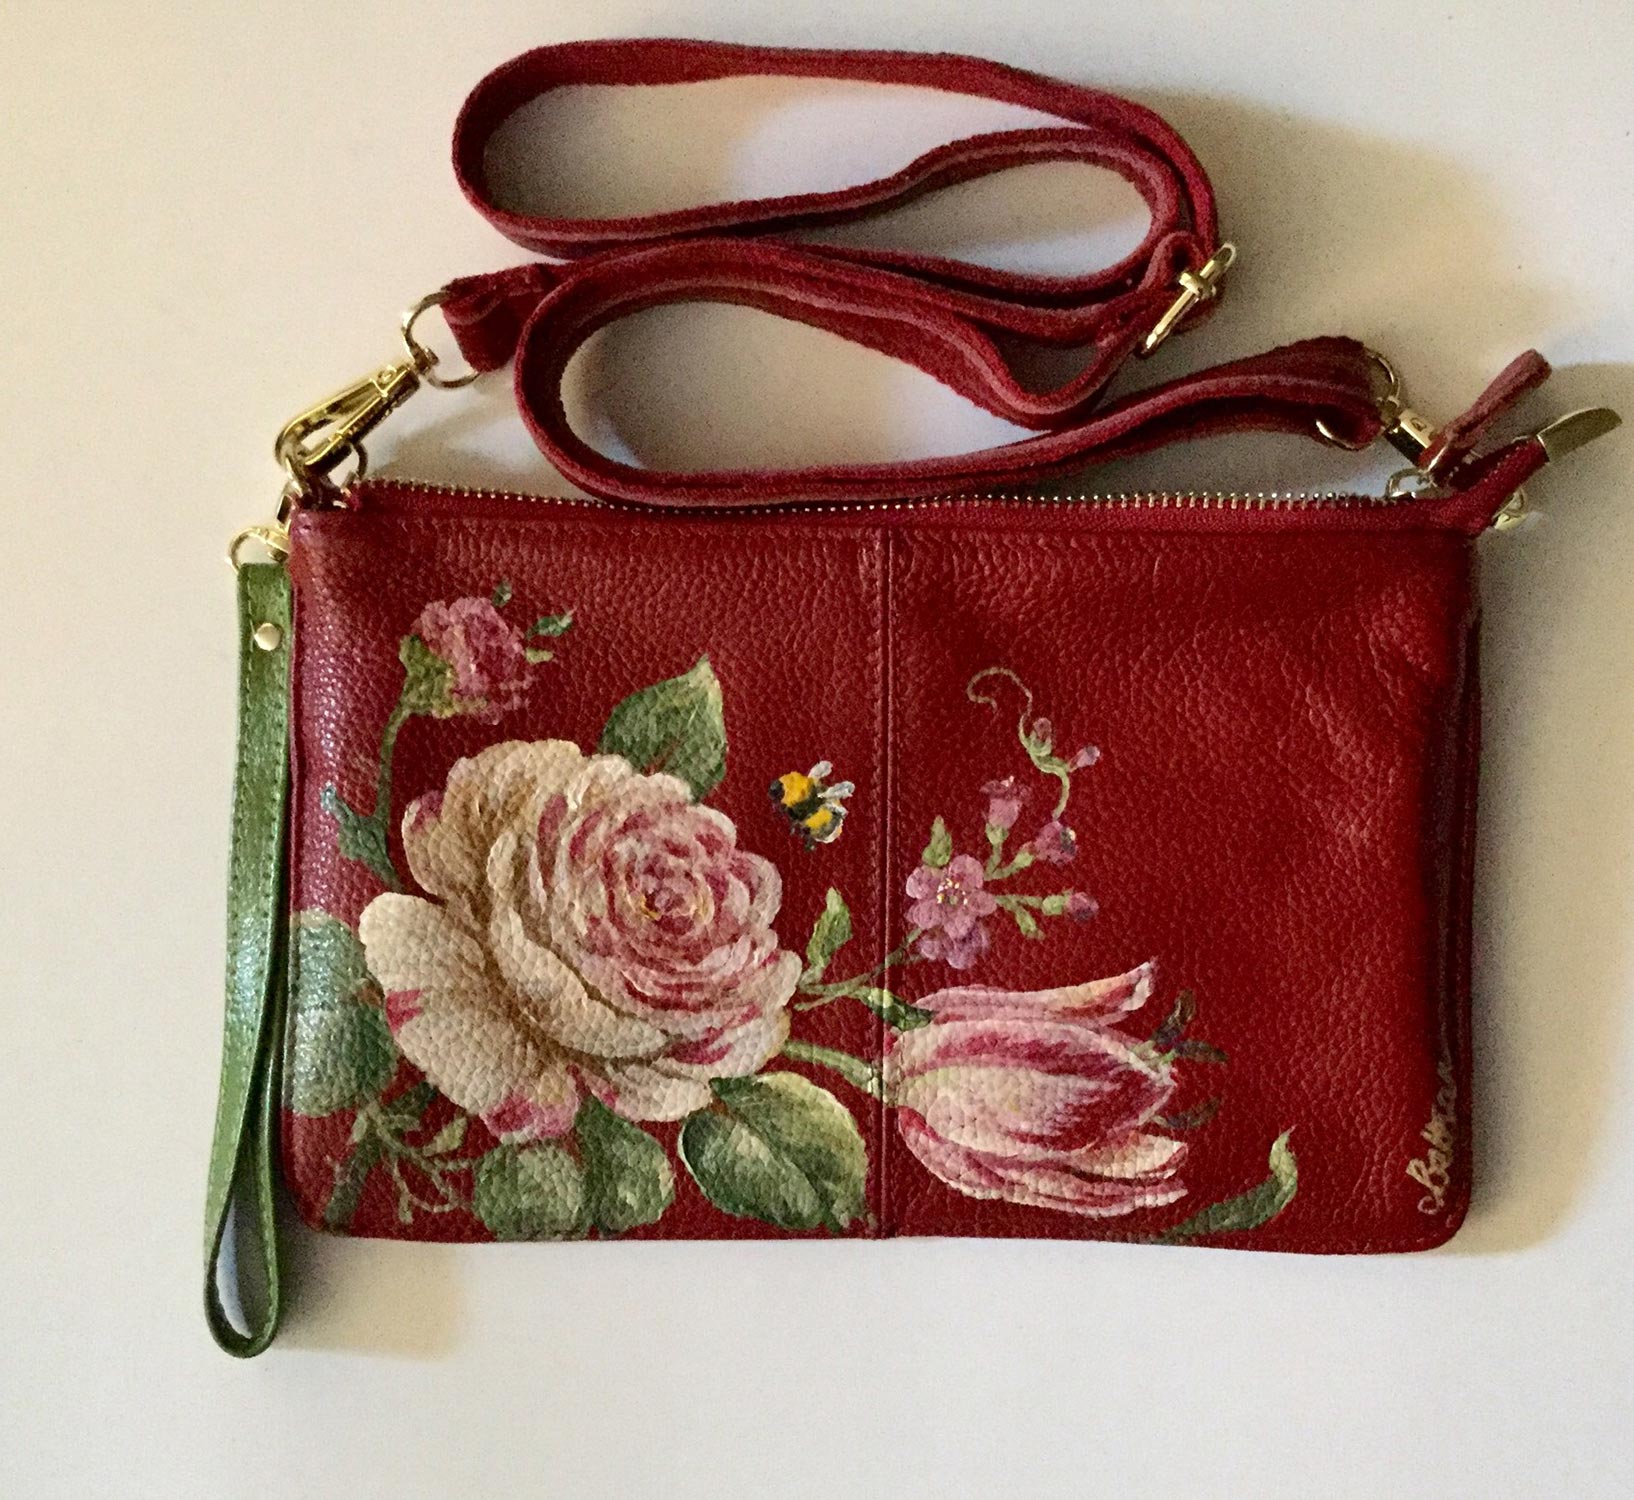 Hand-Painted Leather Cross Body Bag 